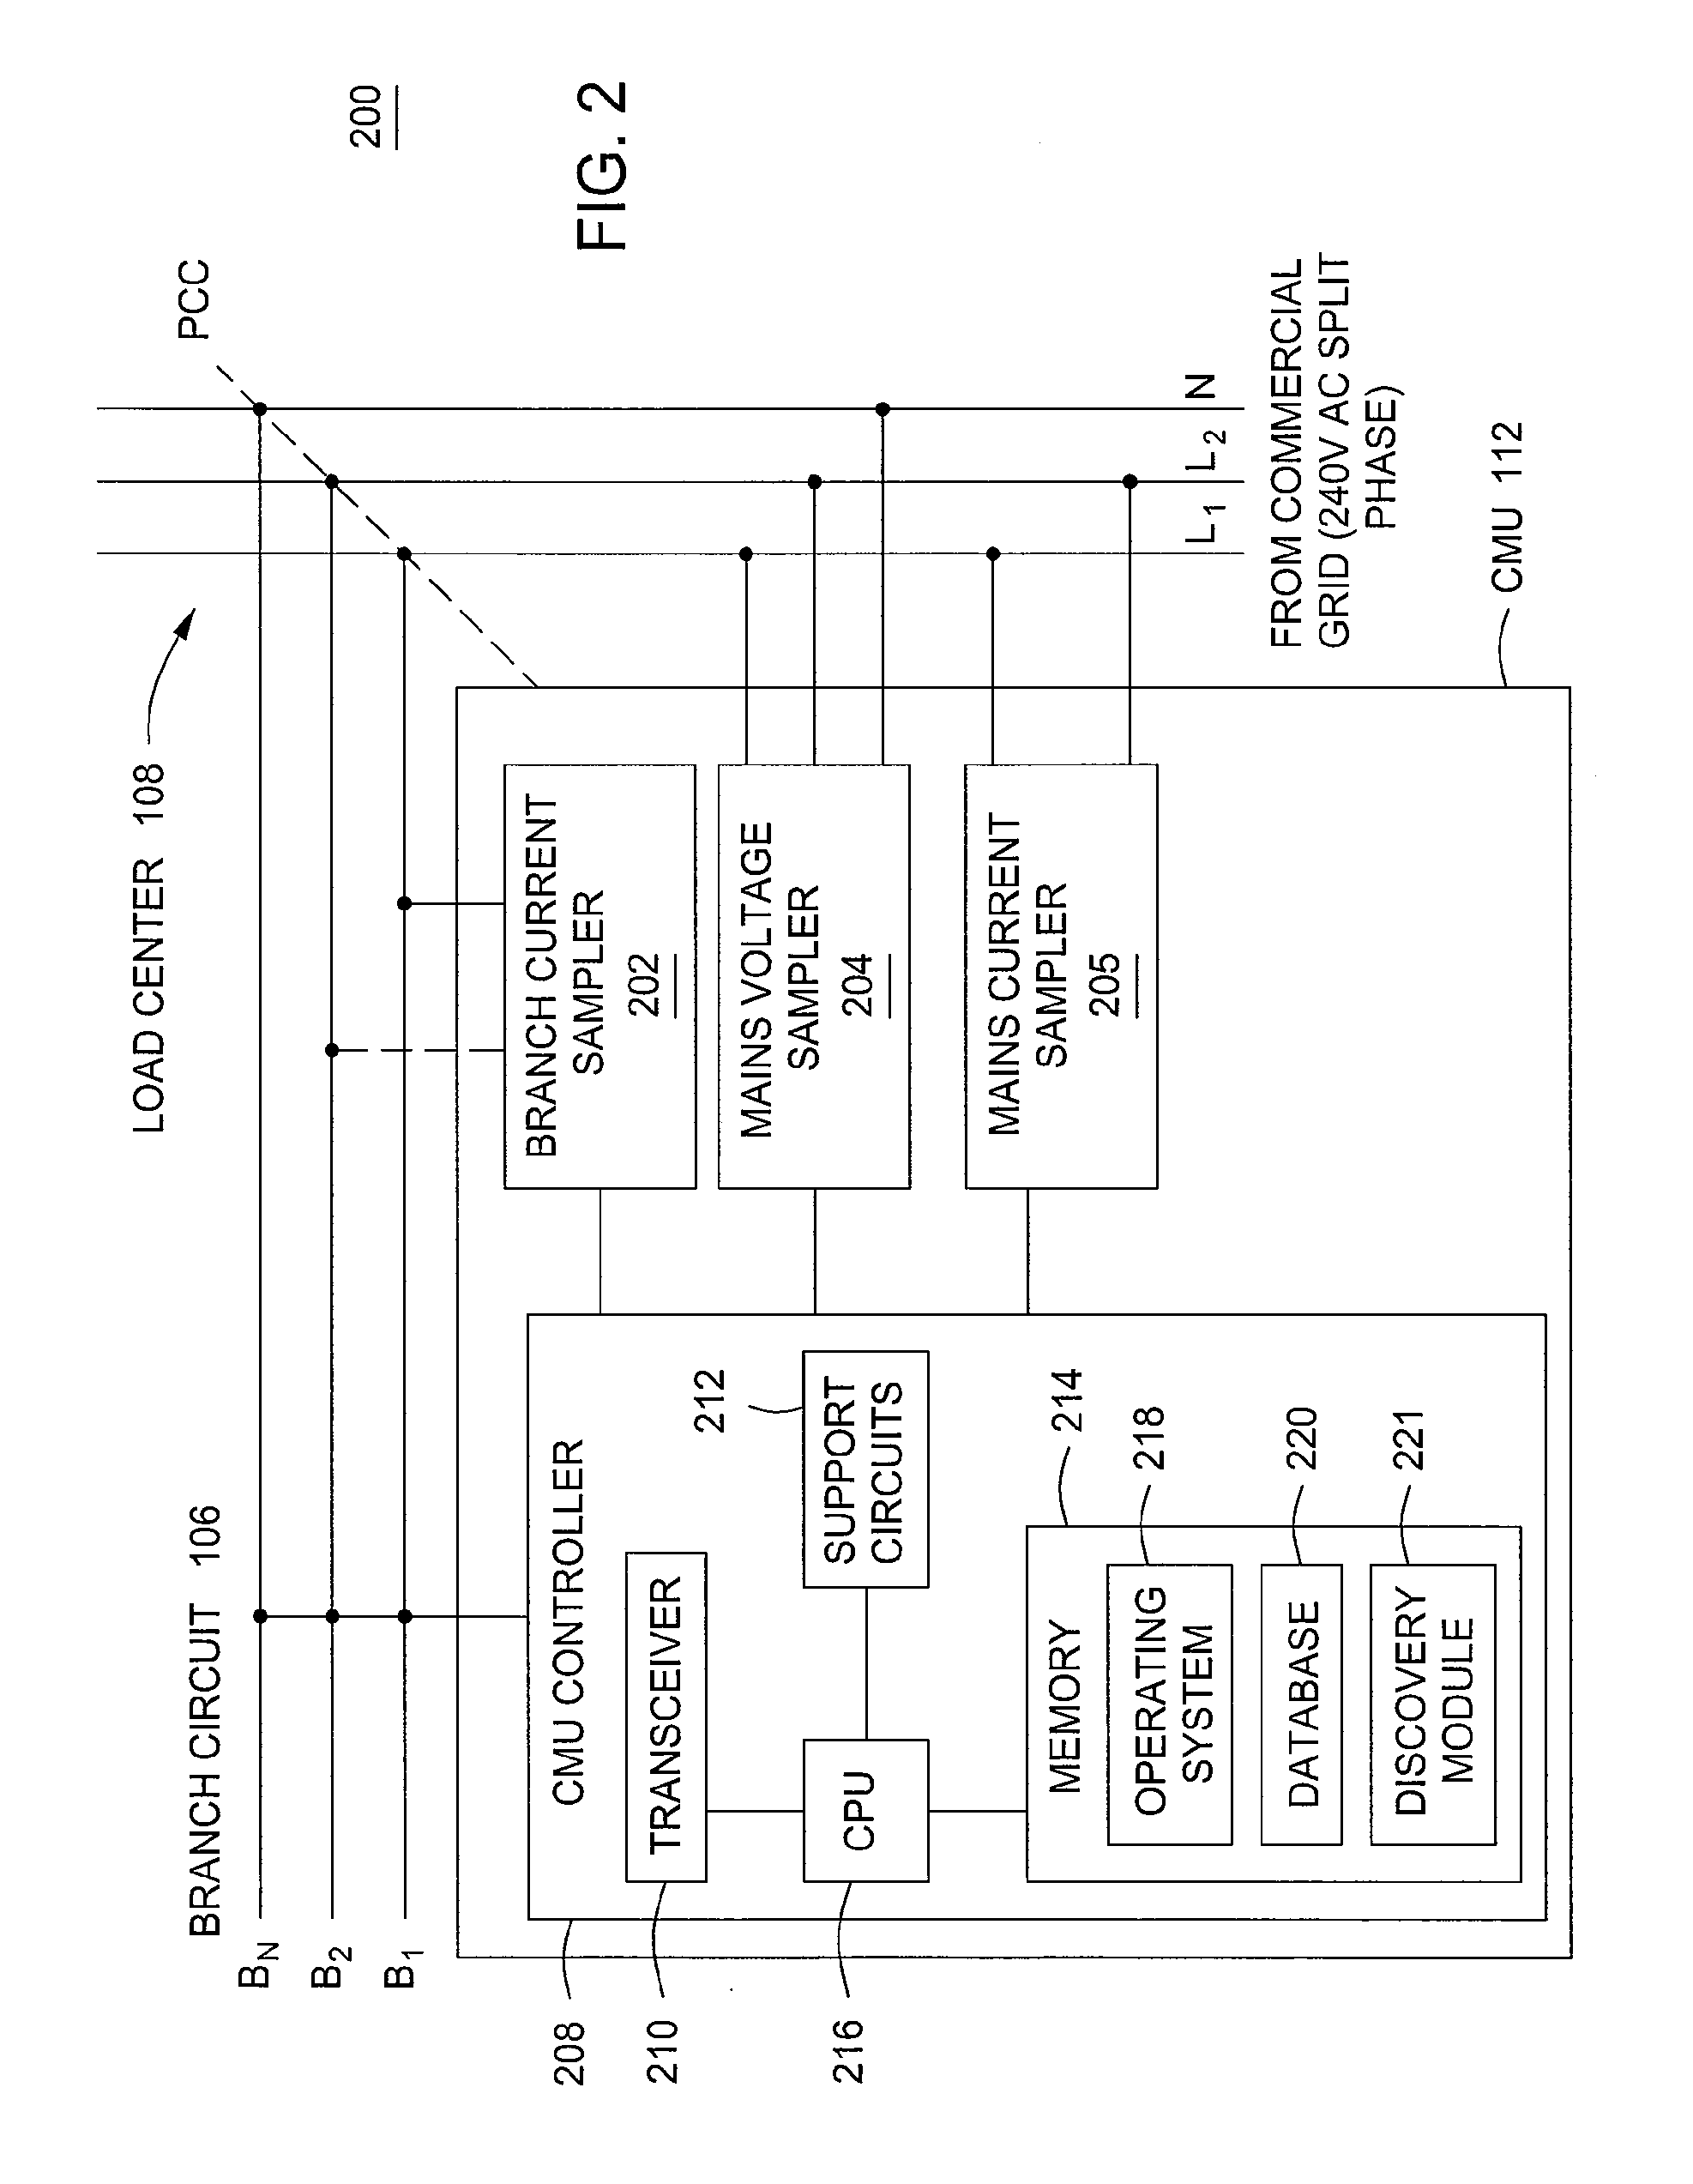 Method and apparatus for characterizing a circuit coupled to an AC line